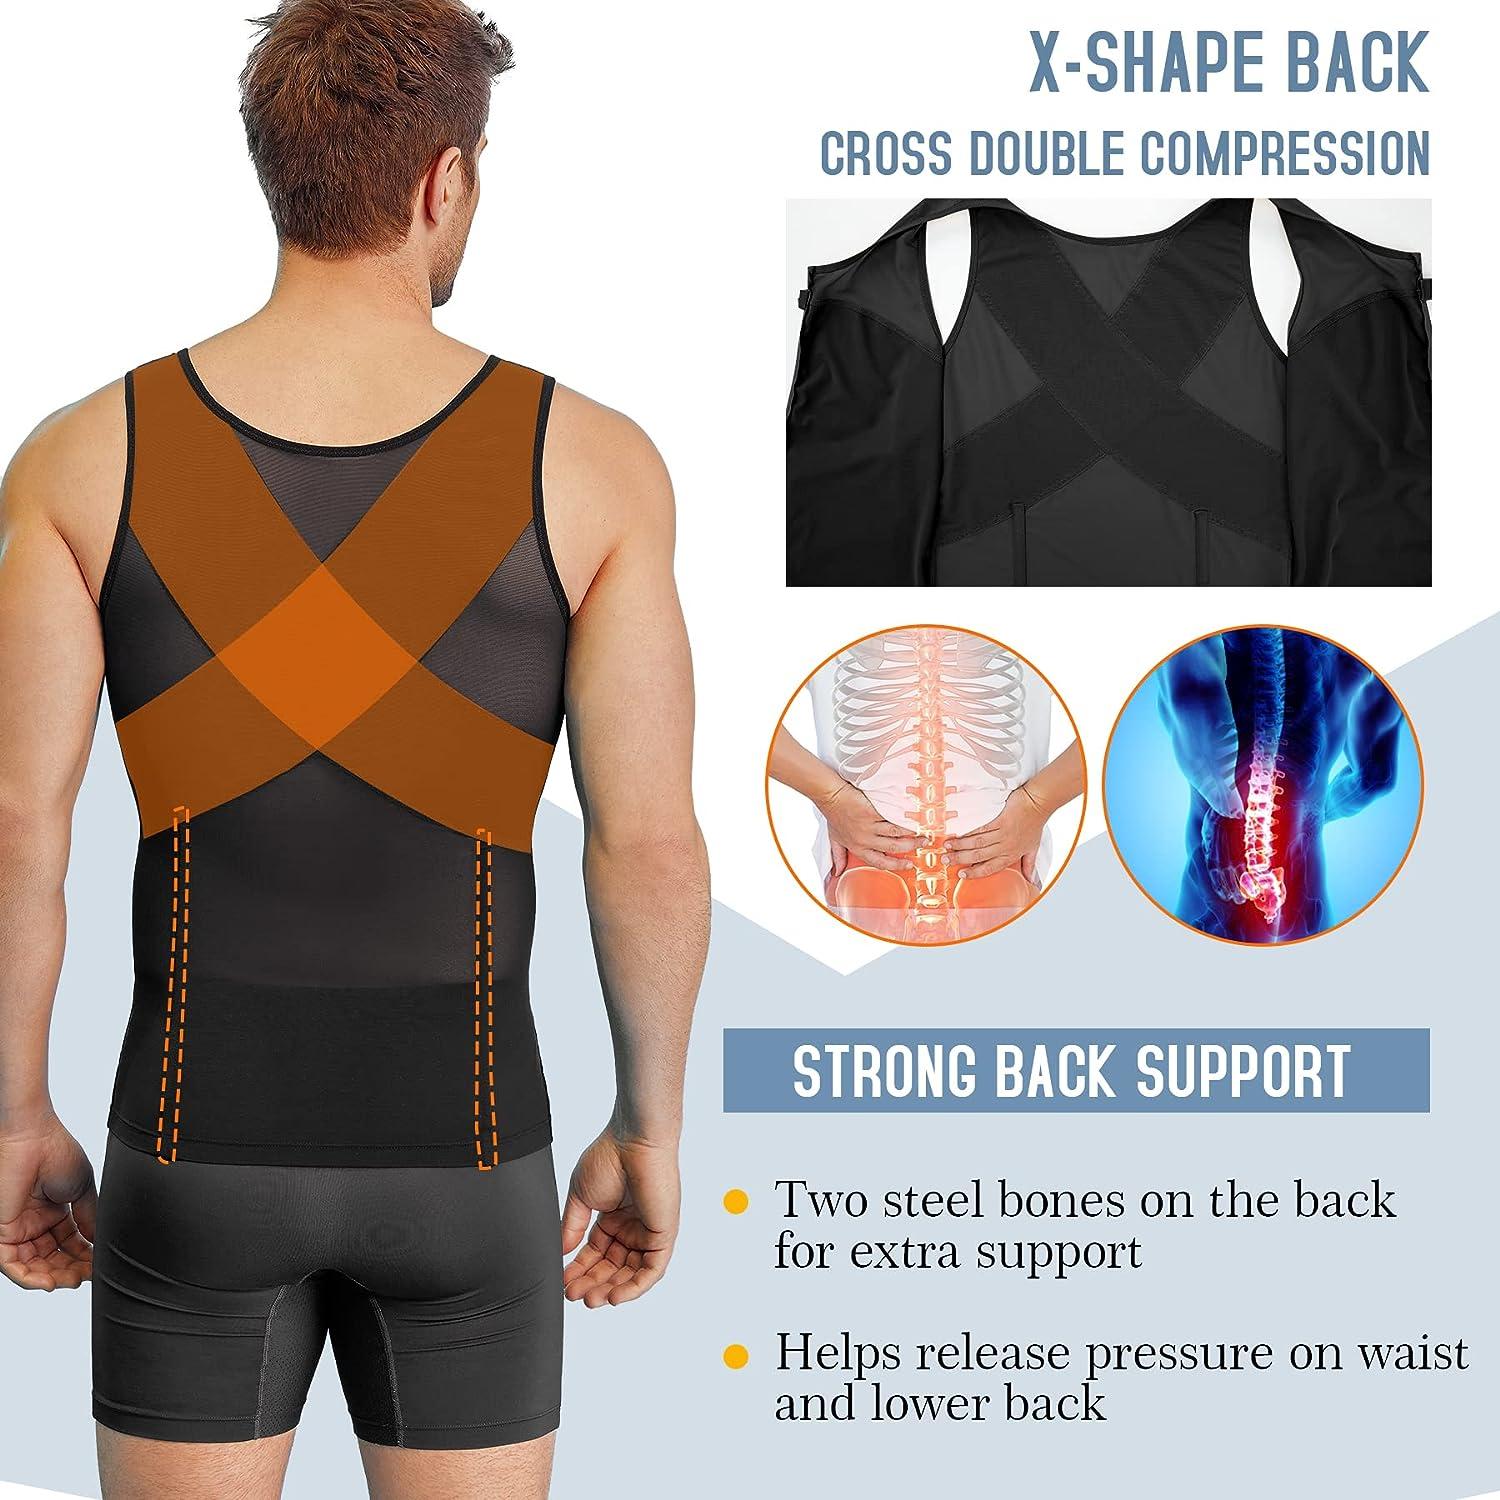  TAILONG Men's Compression Shirt for Body Shaper